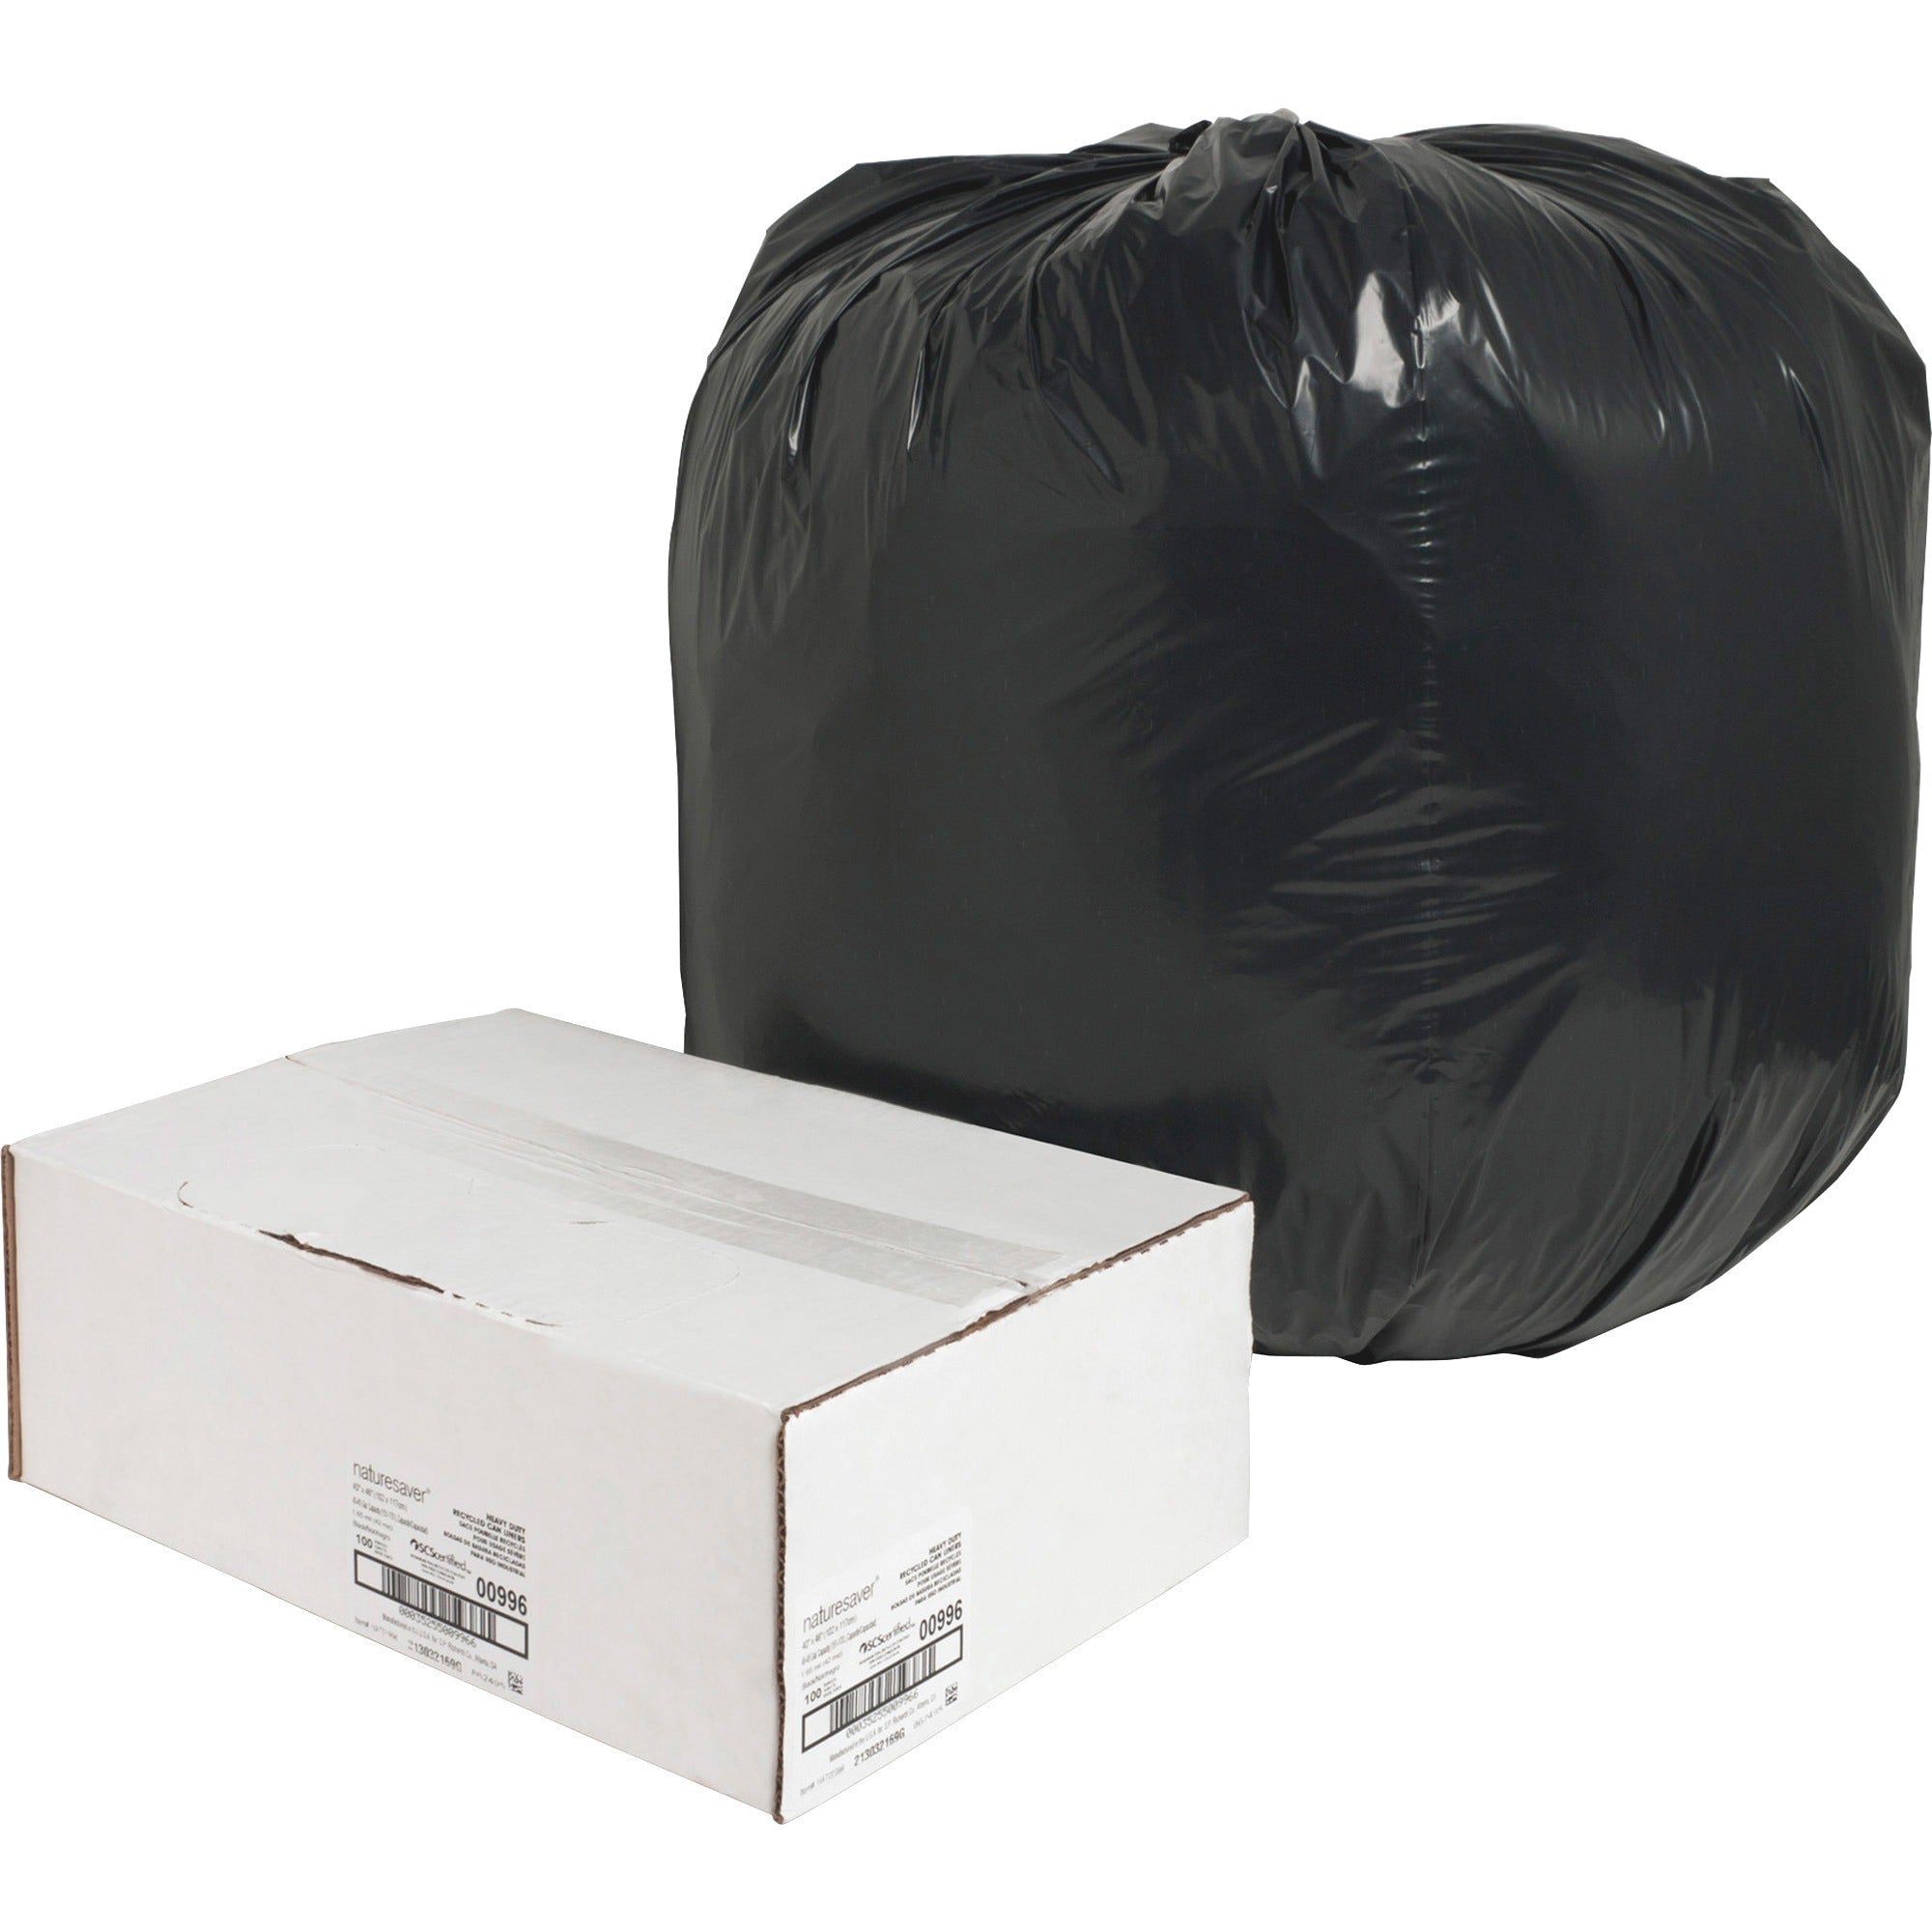 Nature Saver Black Low-density Recycled Can Liners - Large Size - 45 gal Capacity - 40" Width x 46" Length - 1.65 mil (42 Micron) Thickness - Low Density - Black - Plastic - 100/Carton - Cleaning Supplies - Recycled - 